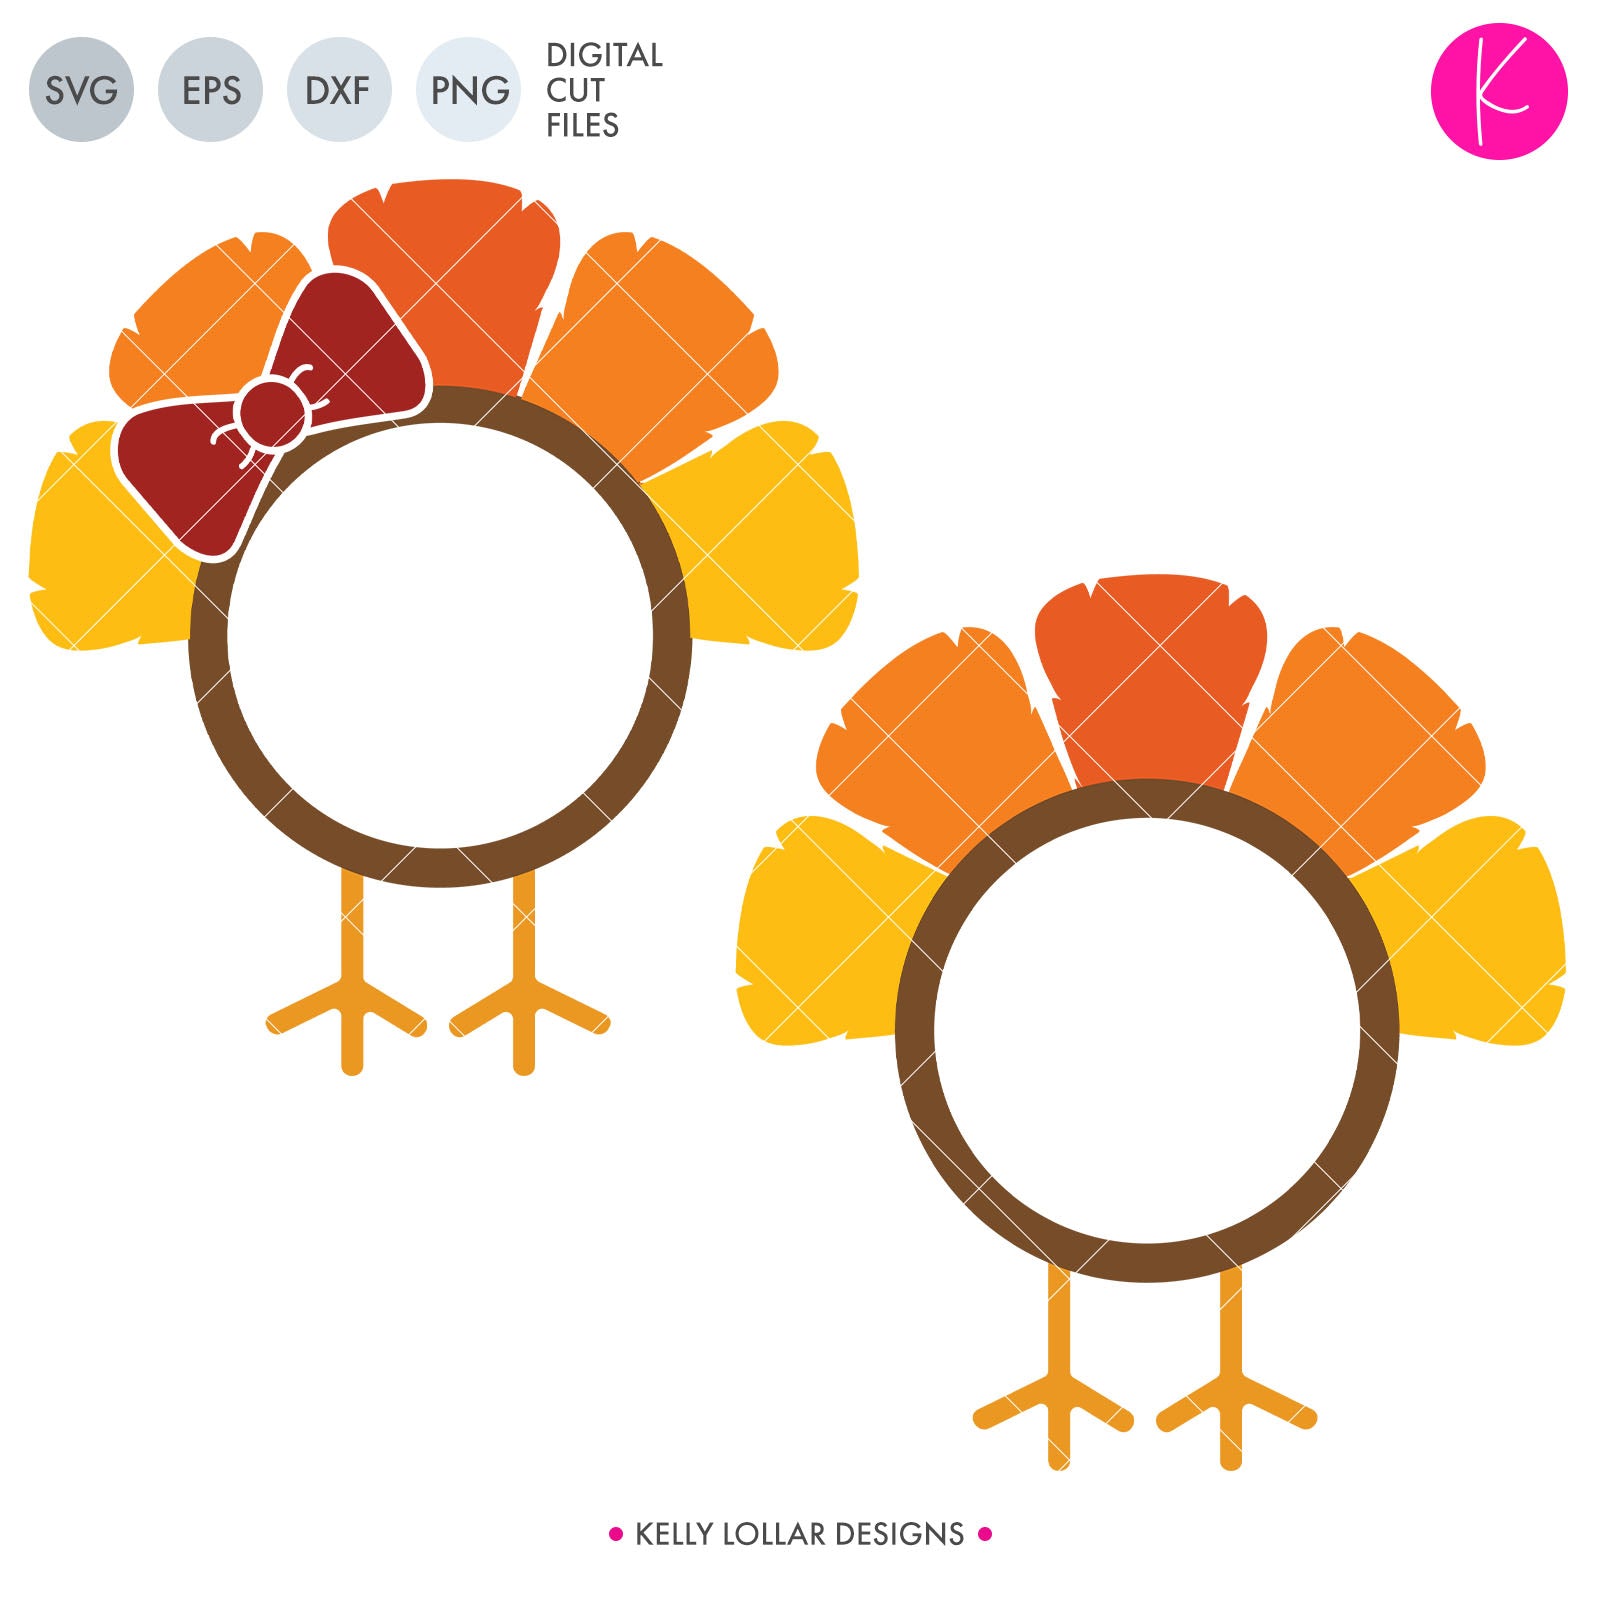 Download Thanksgiving Fall Svg Dxf Eps Png Cut Files Kelly Lollar Designs Tagged Thanksgiving